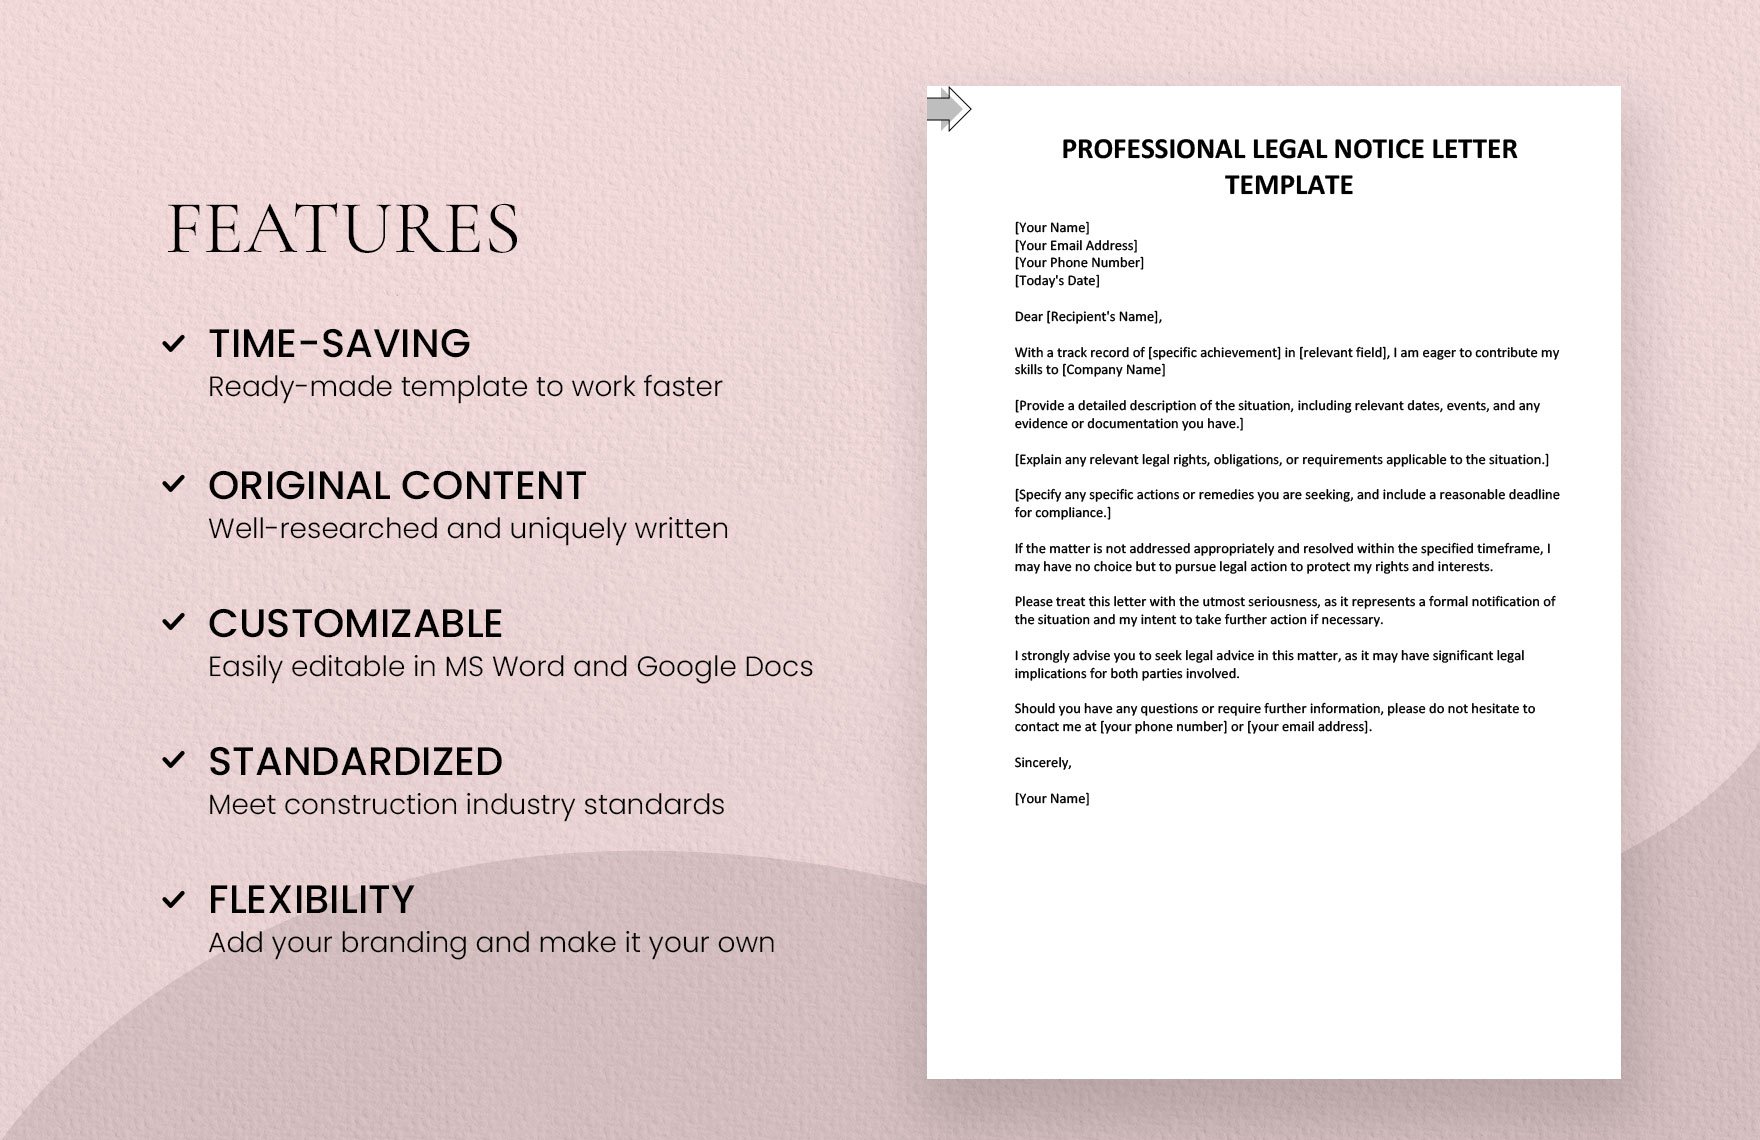 Professional Legal Notice Letter Template